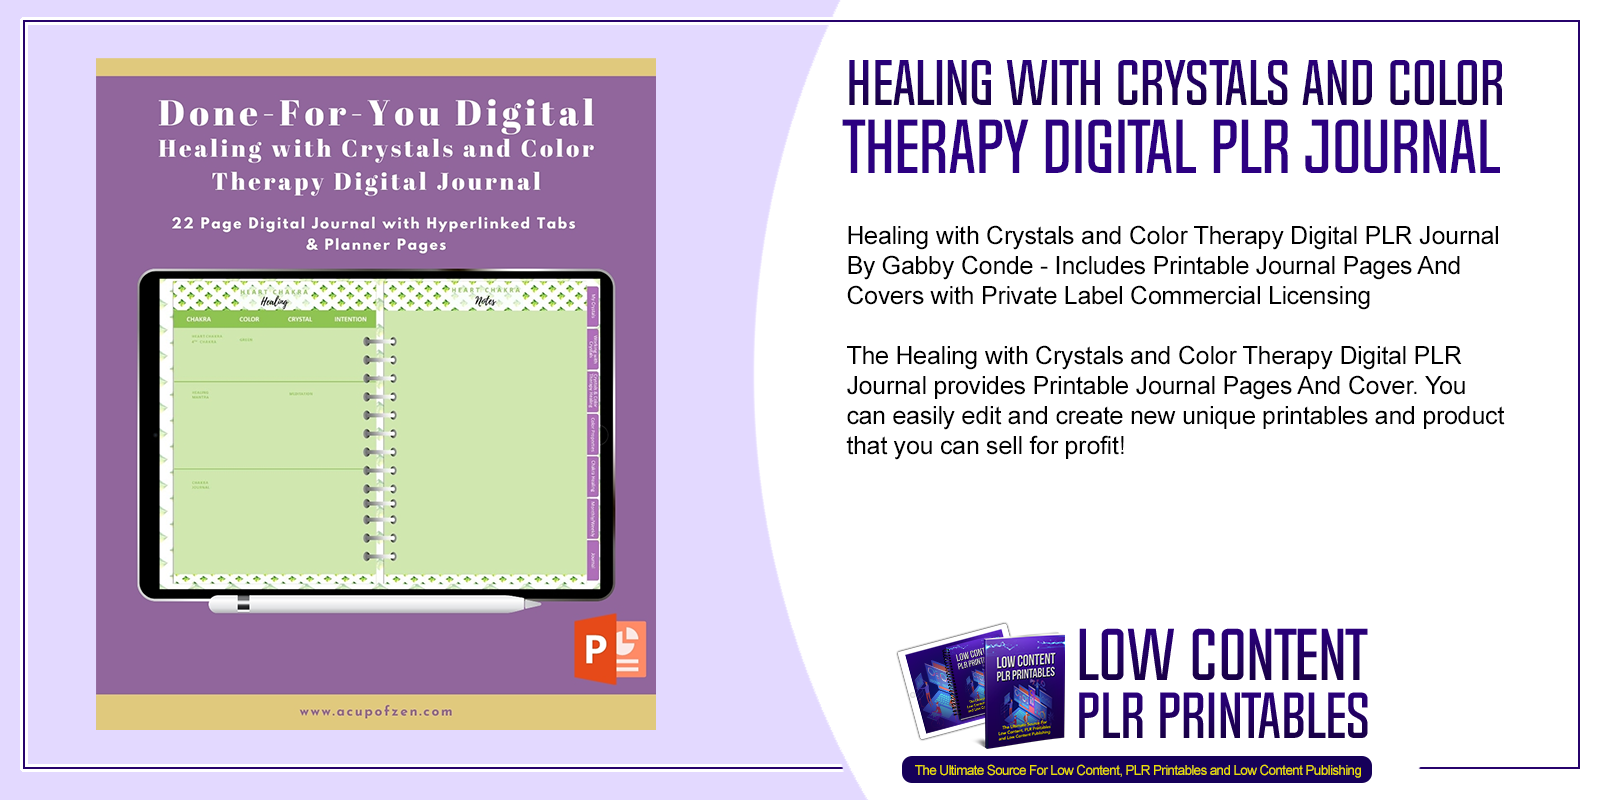 Healing with Crystals and Color Therapy Digital PLR Journal